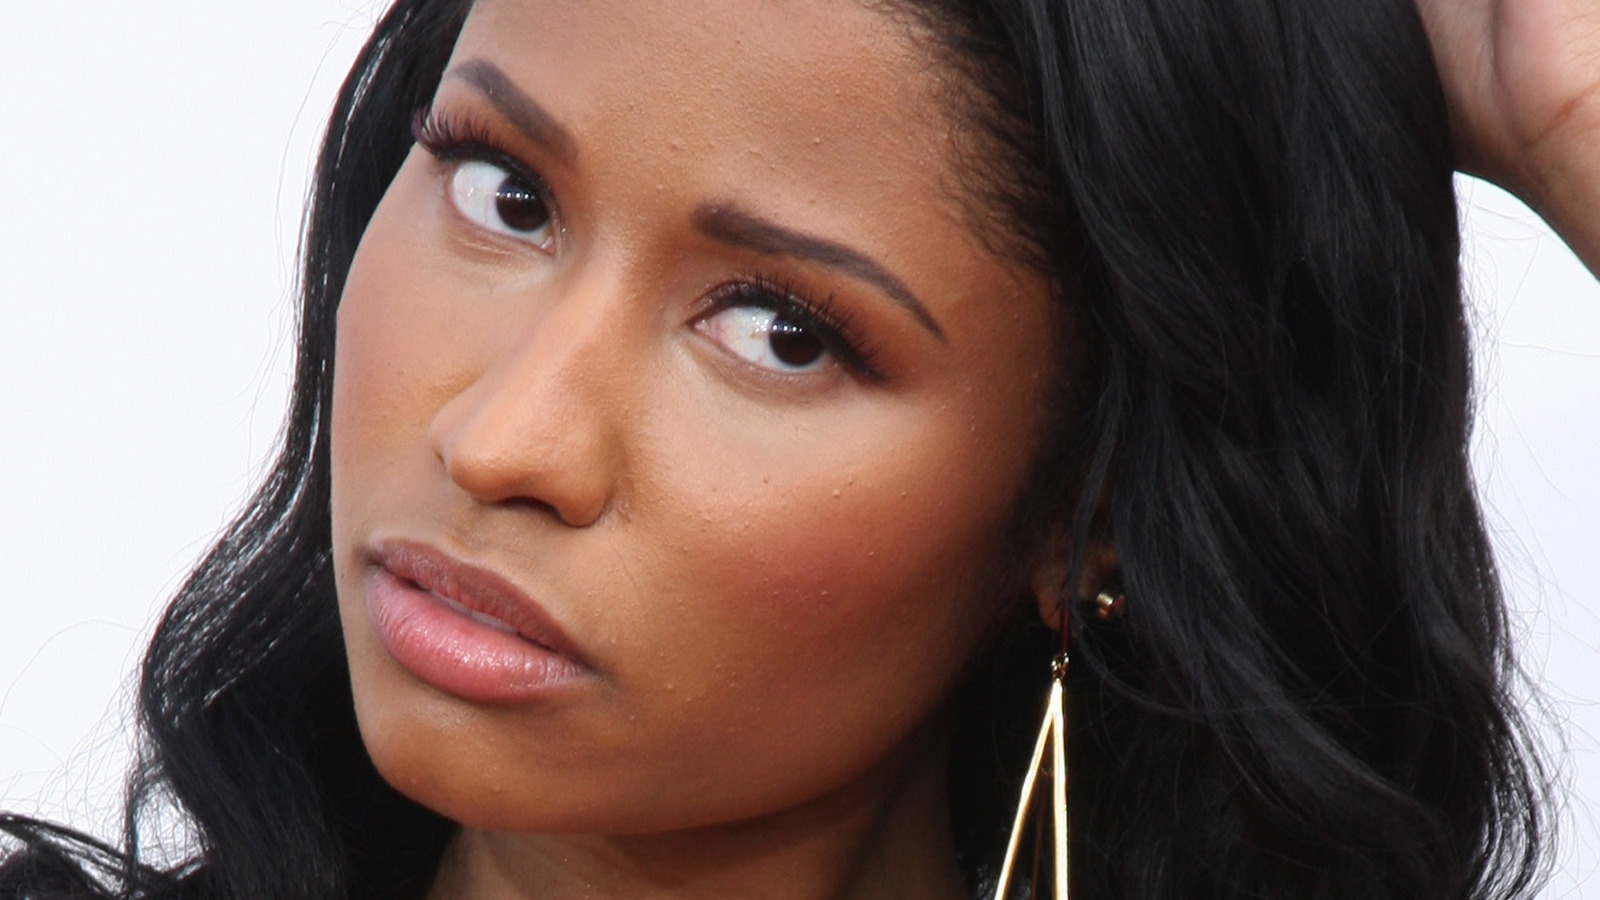 What Does Super Freaky Girl By Nicki Minaj Mean? Here's What We Think